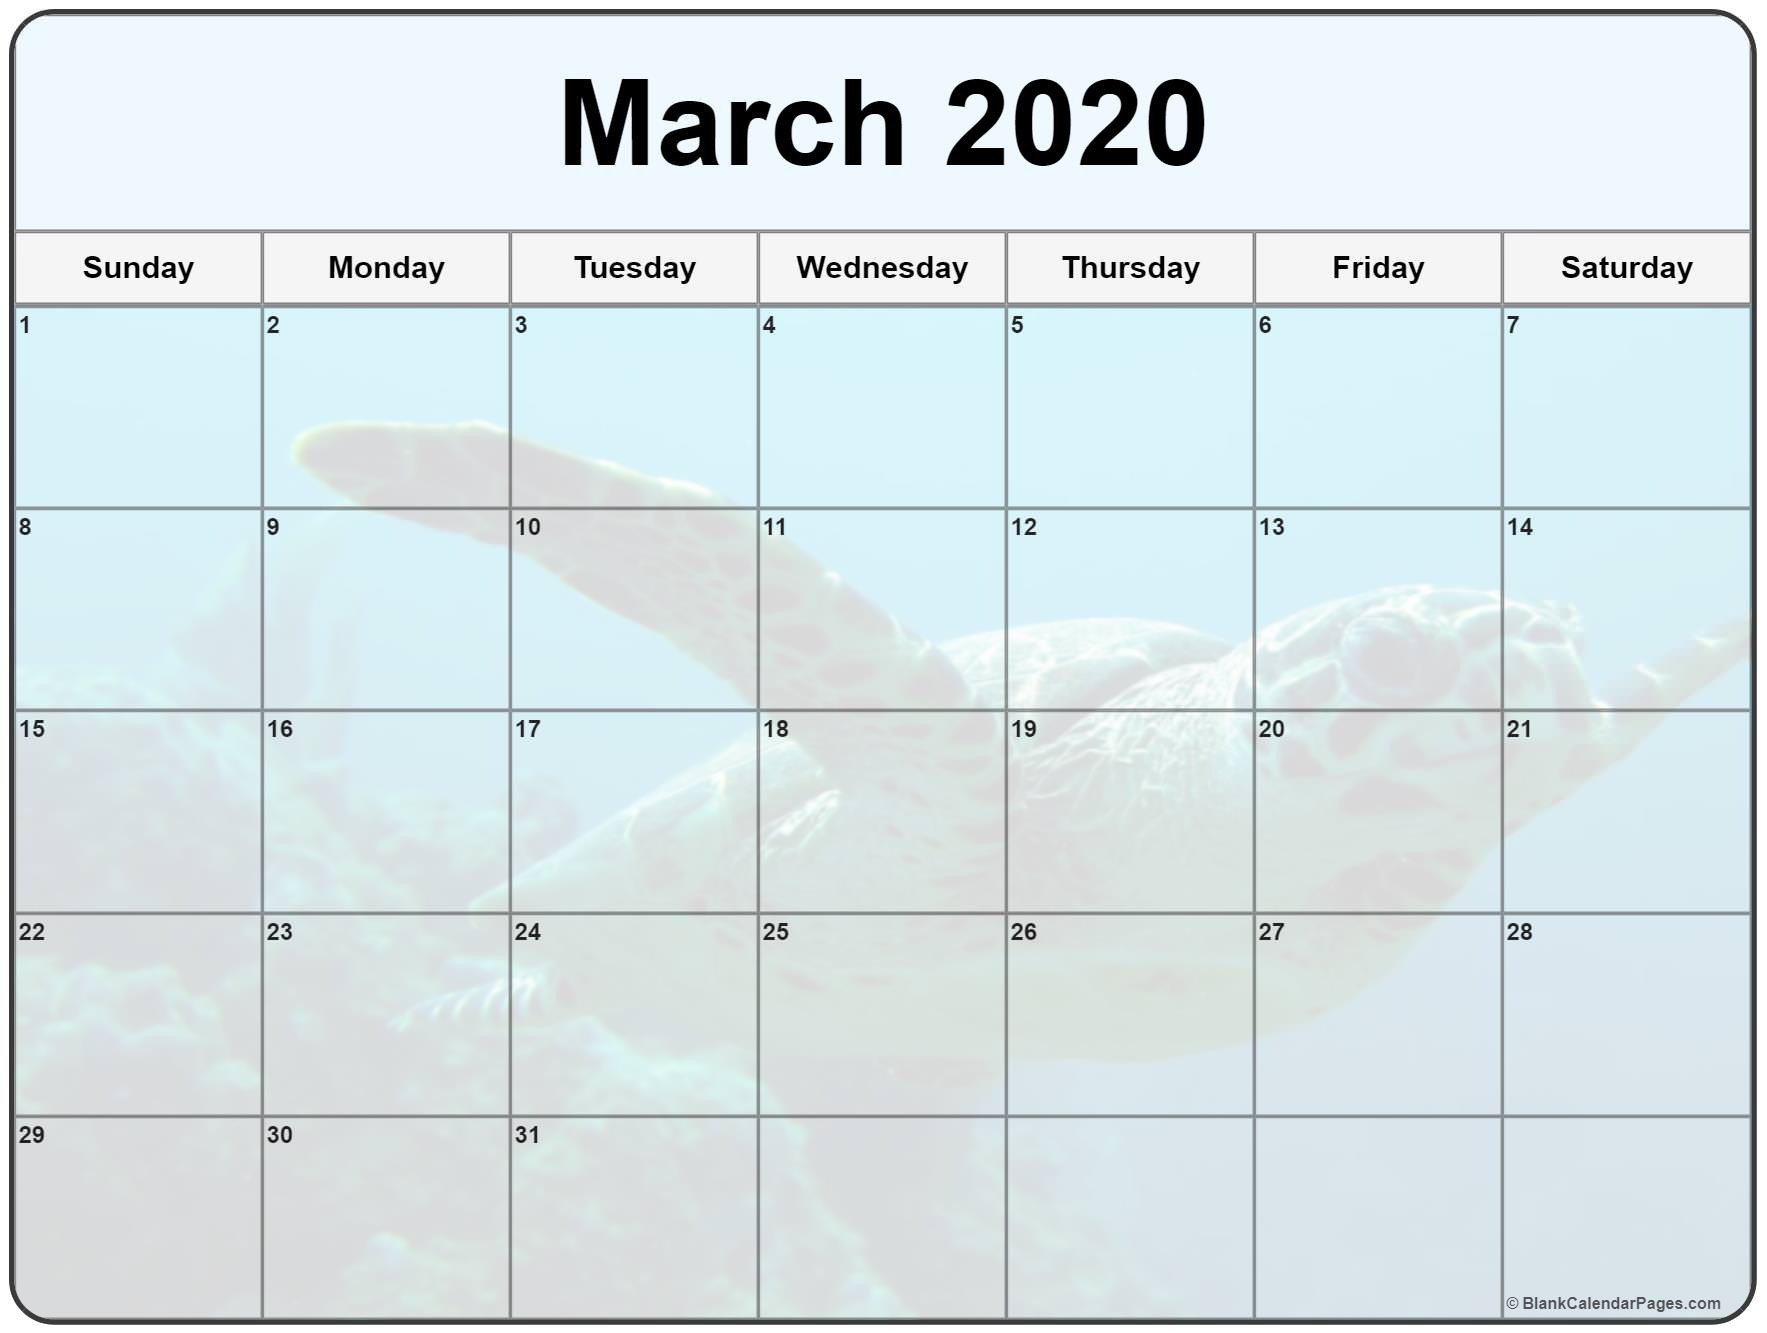 collection of march 2020 photo calendars with image filters